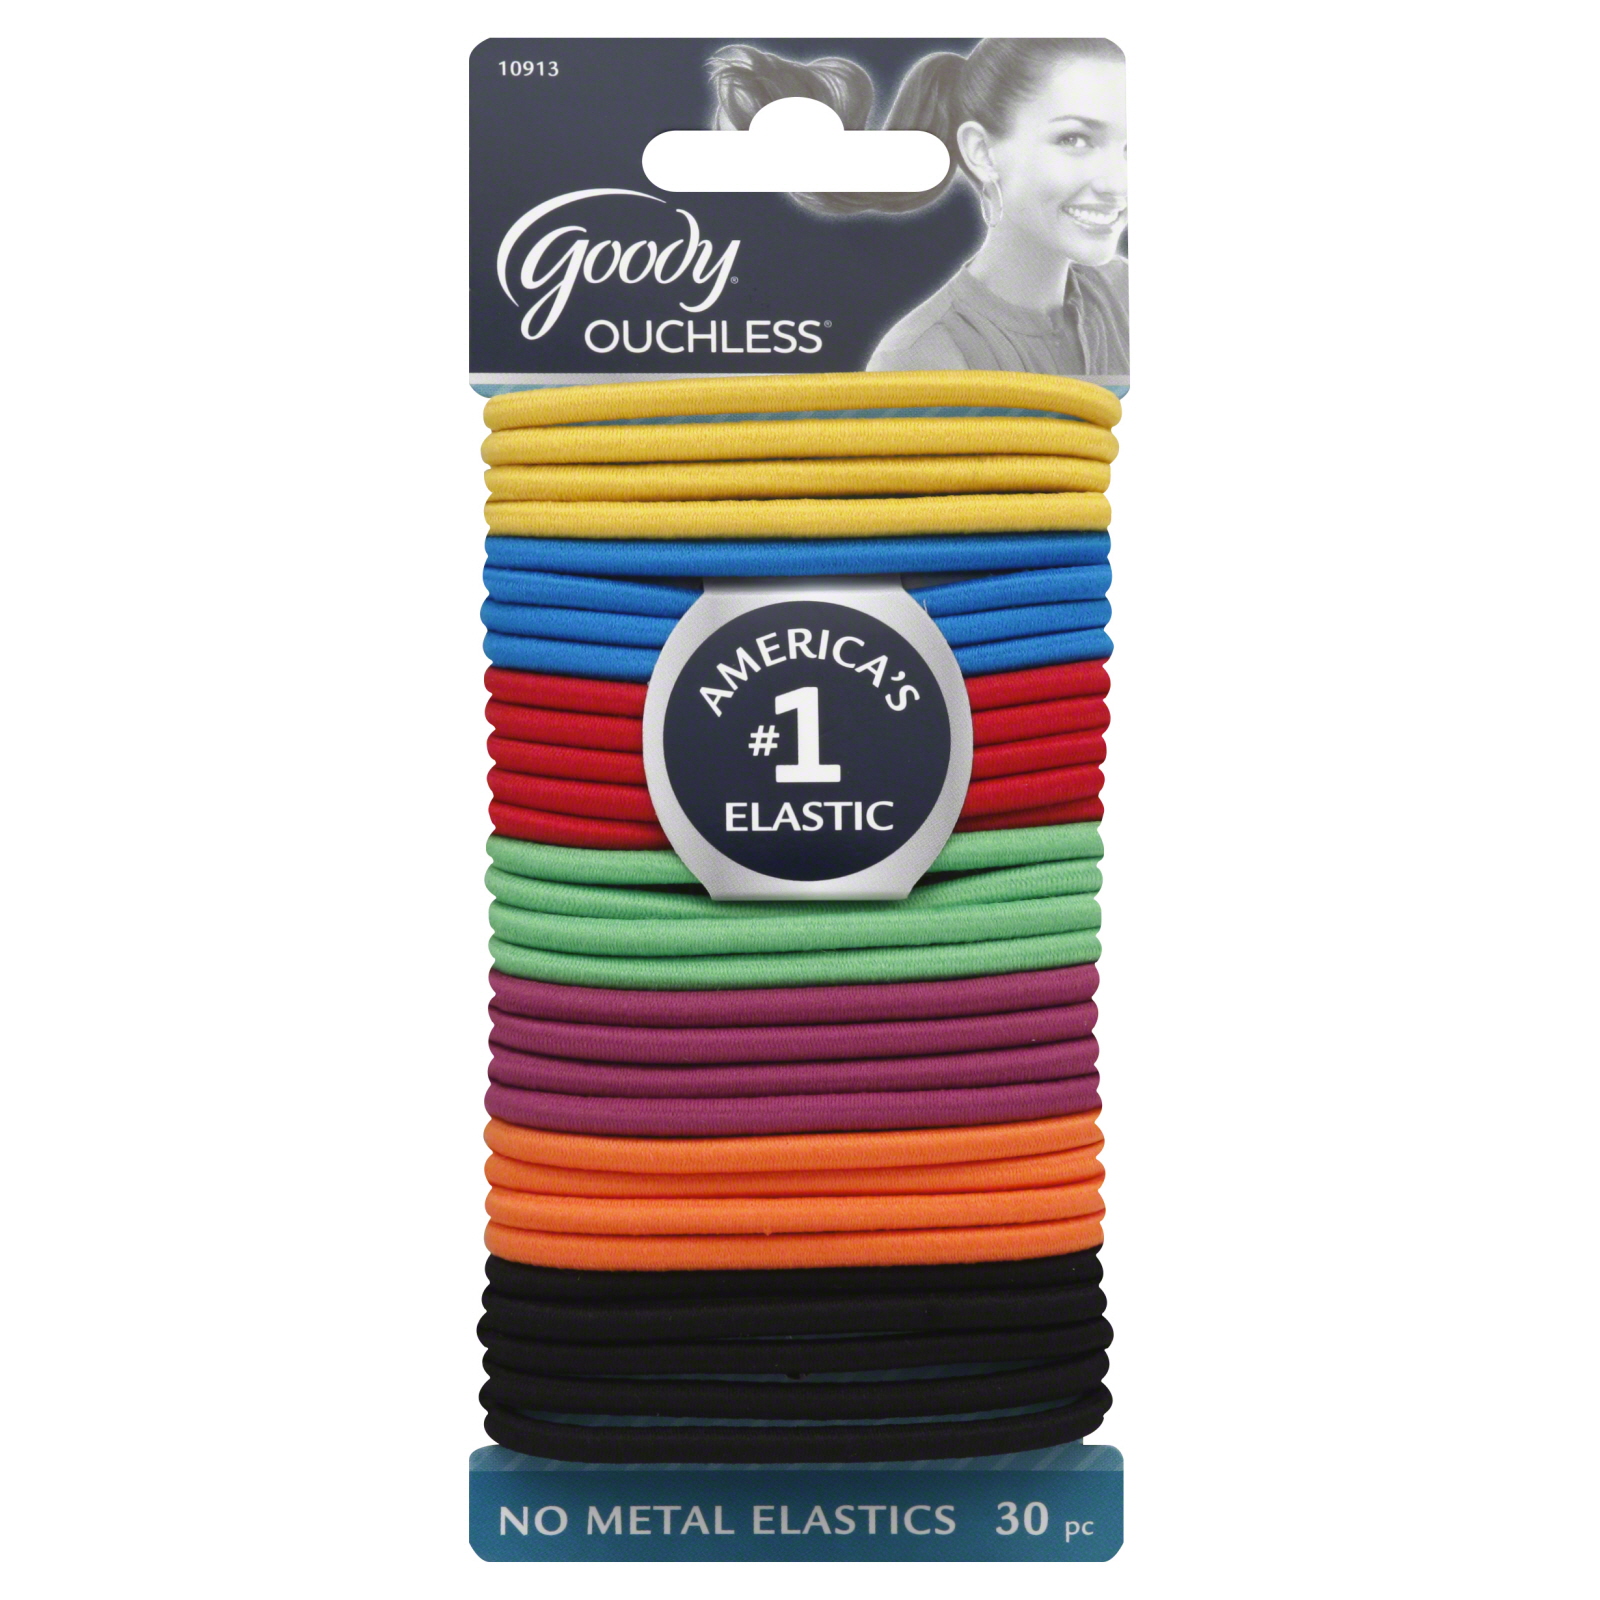 Goody Ouchless Hair Elastics- Candy Coated, 30 pcs